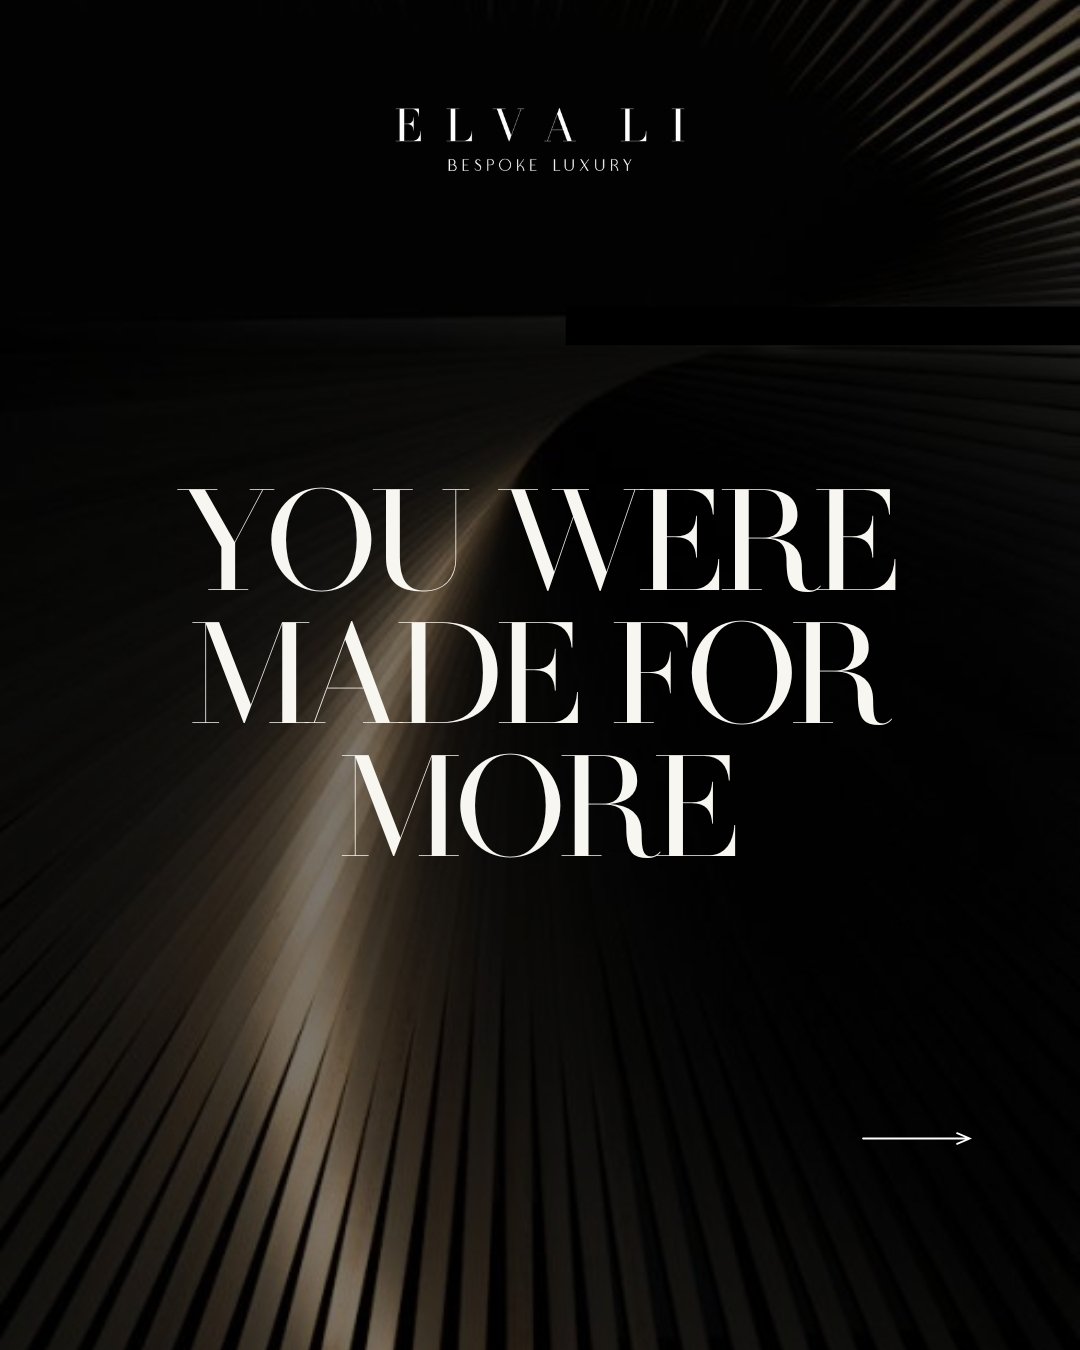 Your work is of high service and you are worthy of massive compensation.

If you desire more, you were made for more.

If you desire luxury, it's time for luxury.

Create your luxury brand the way you want to. 

Create your wealth the way you want to